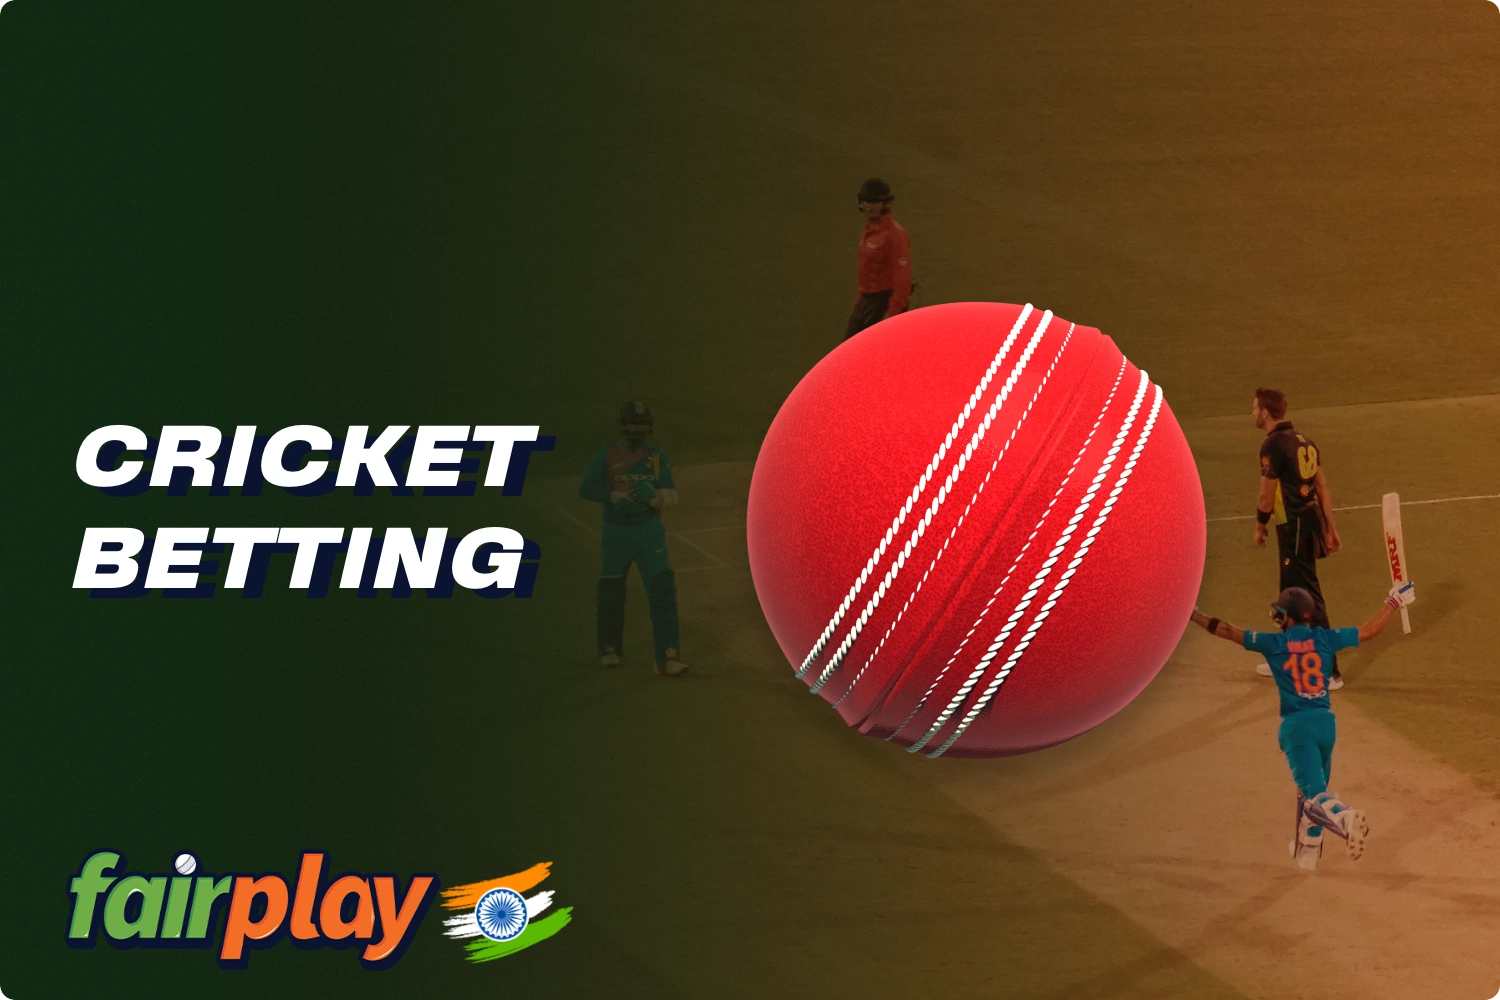 Cricket betting at Fairplay is available to all registered users from India